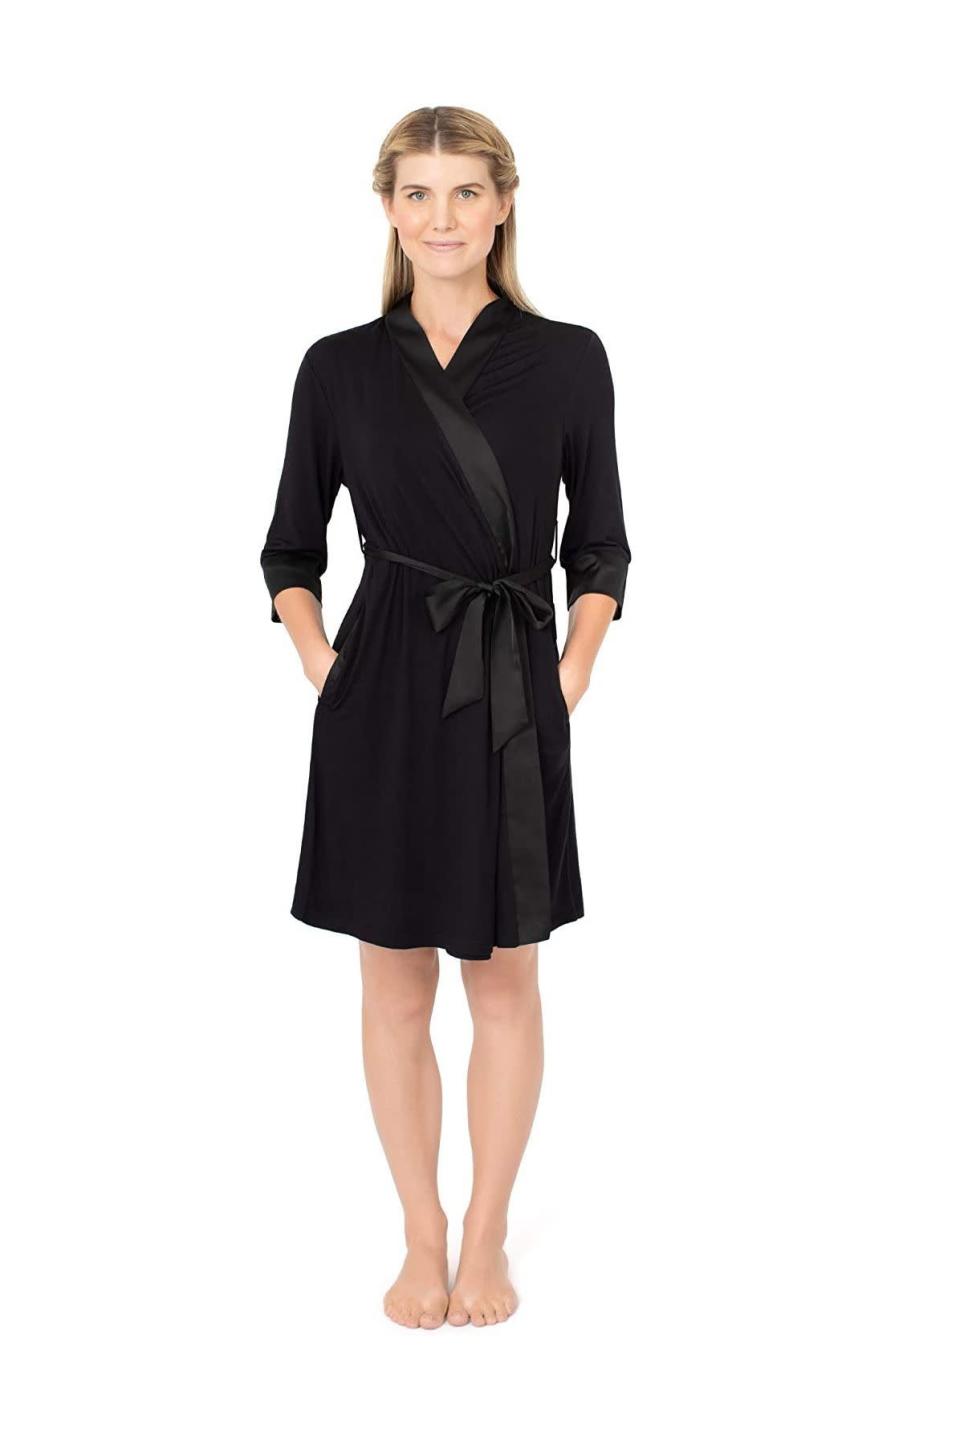 <p><strong>Kindred Bravely</strong></p><p>amazon.com</p><p><strong>$39.99</strong></p><p>This robe is a dream for moms-to-be and news moms alike. Two belt positions make it adjustable for pregnancy, postpartum, and beyond. It’s lightweight for any season and made of a super-soft knit fabric with satin trim. Bonus: This robe has extra-deep pockets for nursing essentials, your phone, or whatever else you need to keep close. </p>